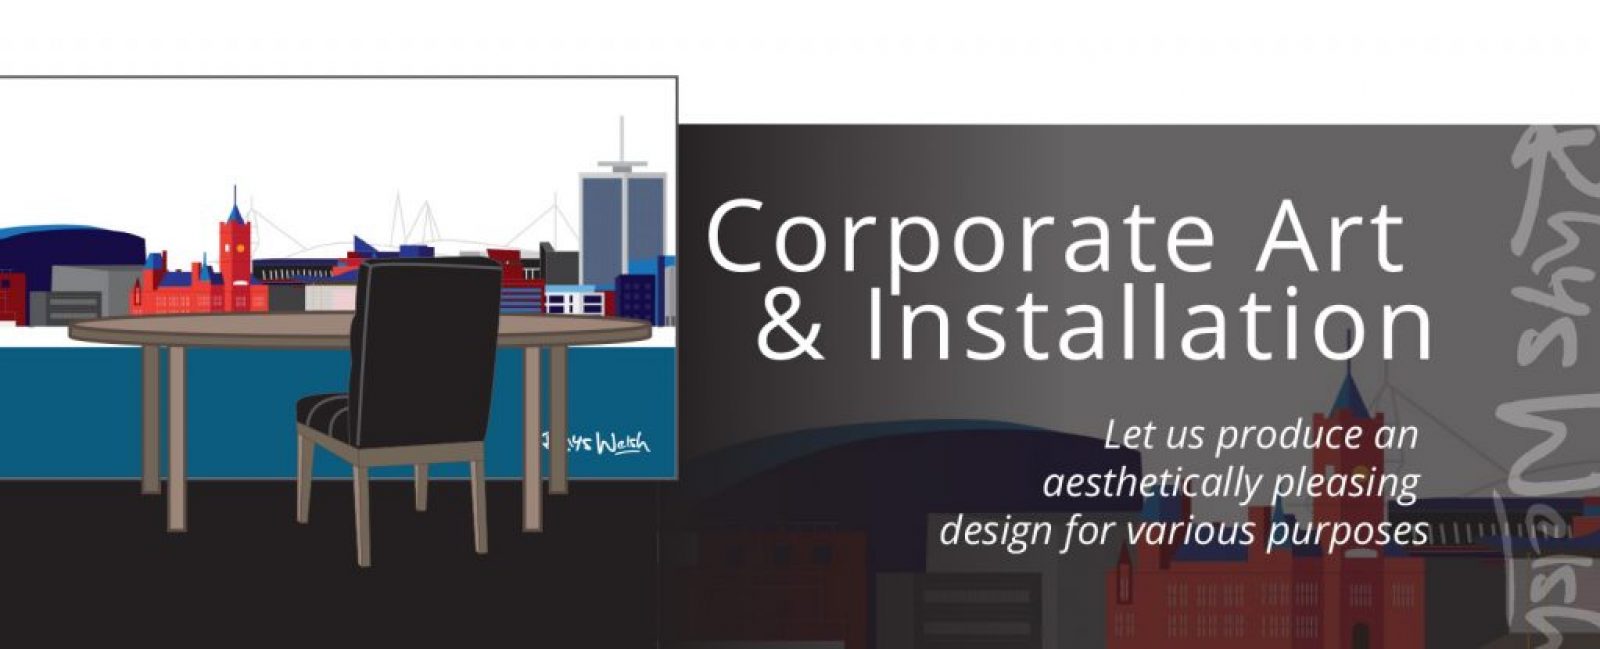 Corporate-Art-Installation-Graphic-for-websites-cardiff